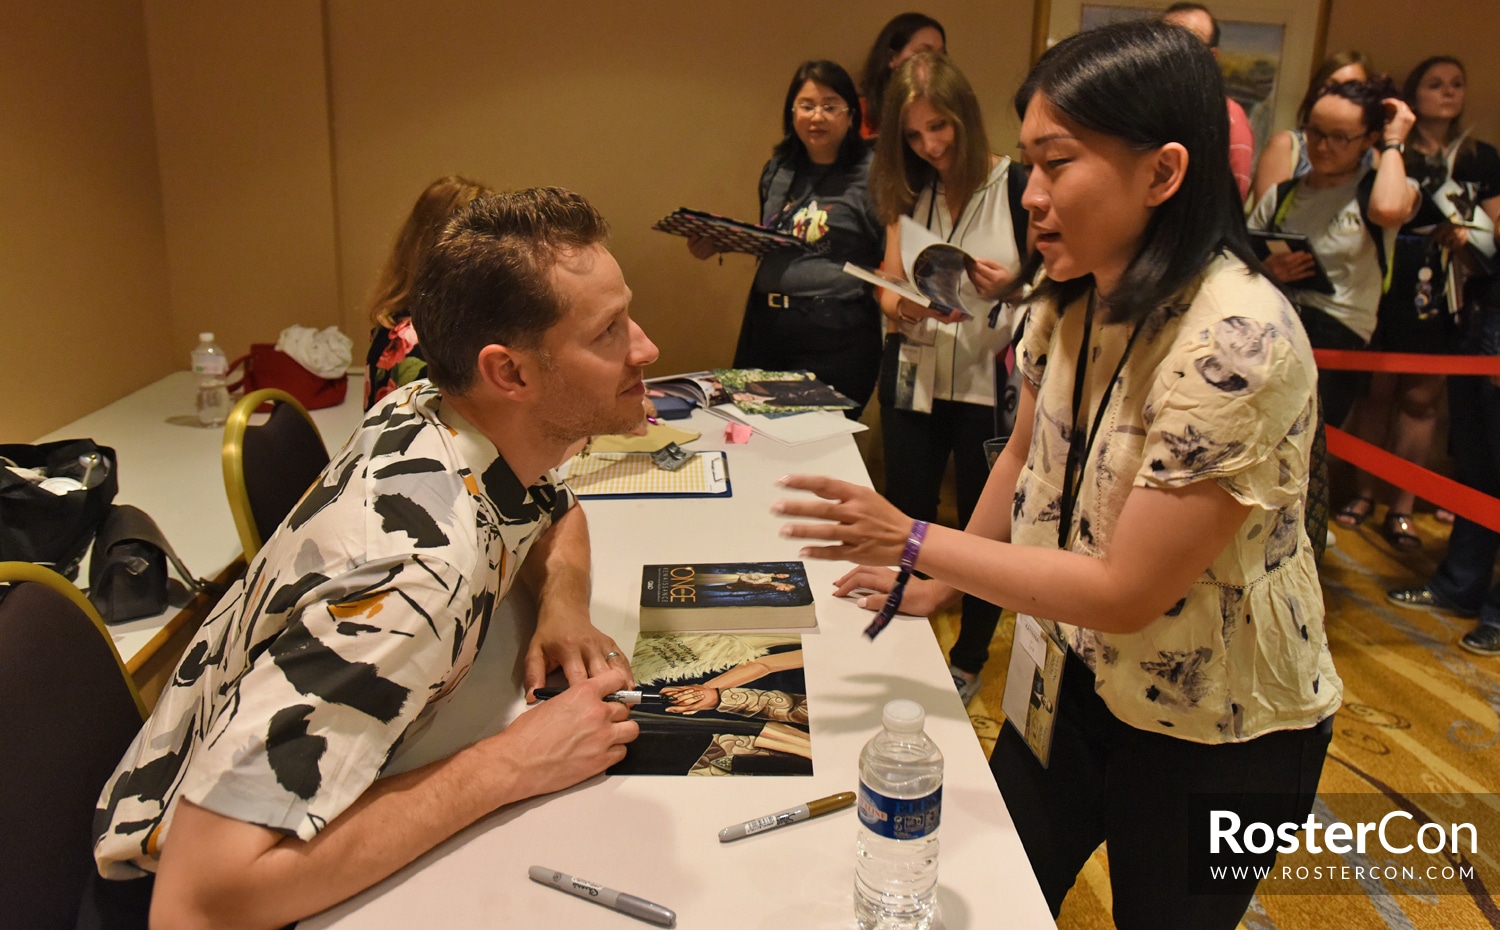 Josh Dallas - The Happy Ending Convention 3 - Once Upon A Time